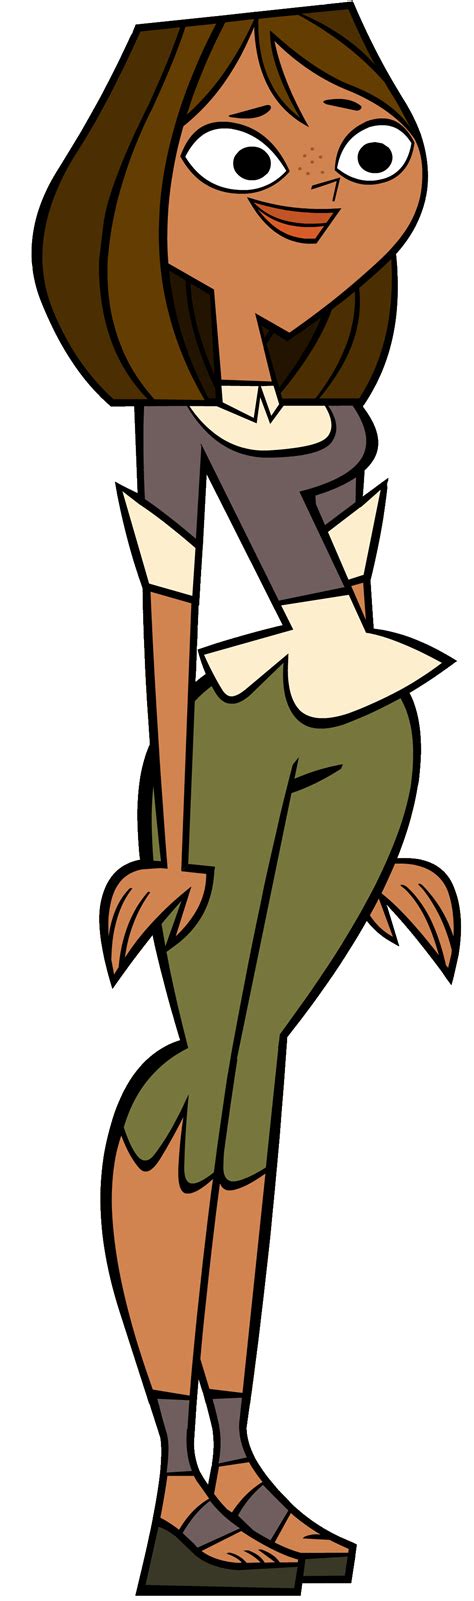 Total drama characters wiki. Millie was a camper on Total Drama Island (2023) as a member of the Ferocious Trout. She returned for Total Drama Island (2024) as a member of Team Rat Face. Millie is an aspiring journalist who writes about people and how they act. She can often come off as condescending, self-superior, and judgmental, but is generally social and kind. She has a … 